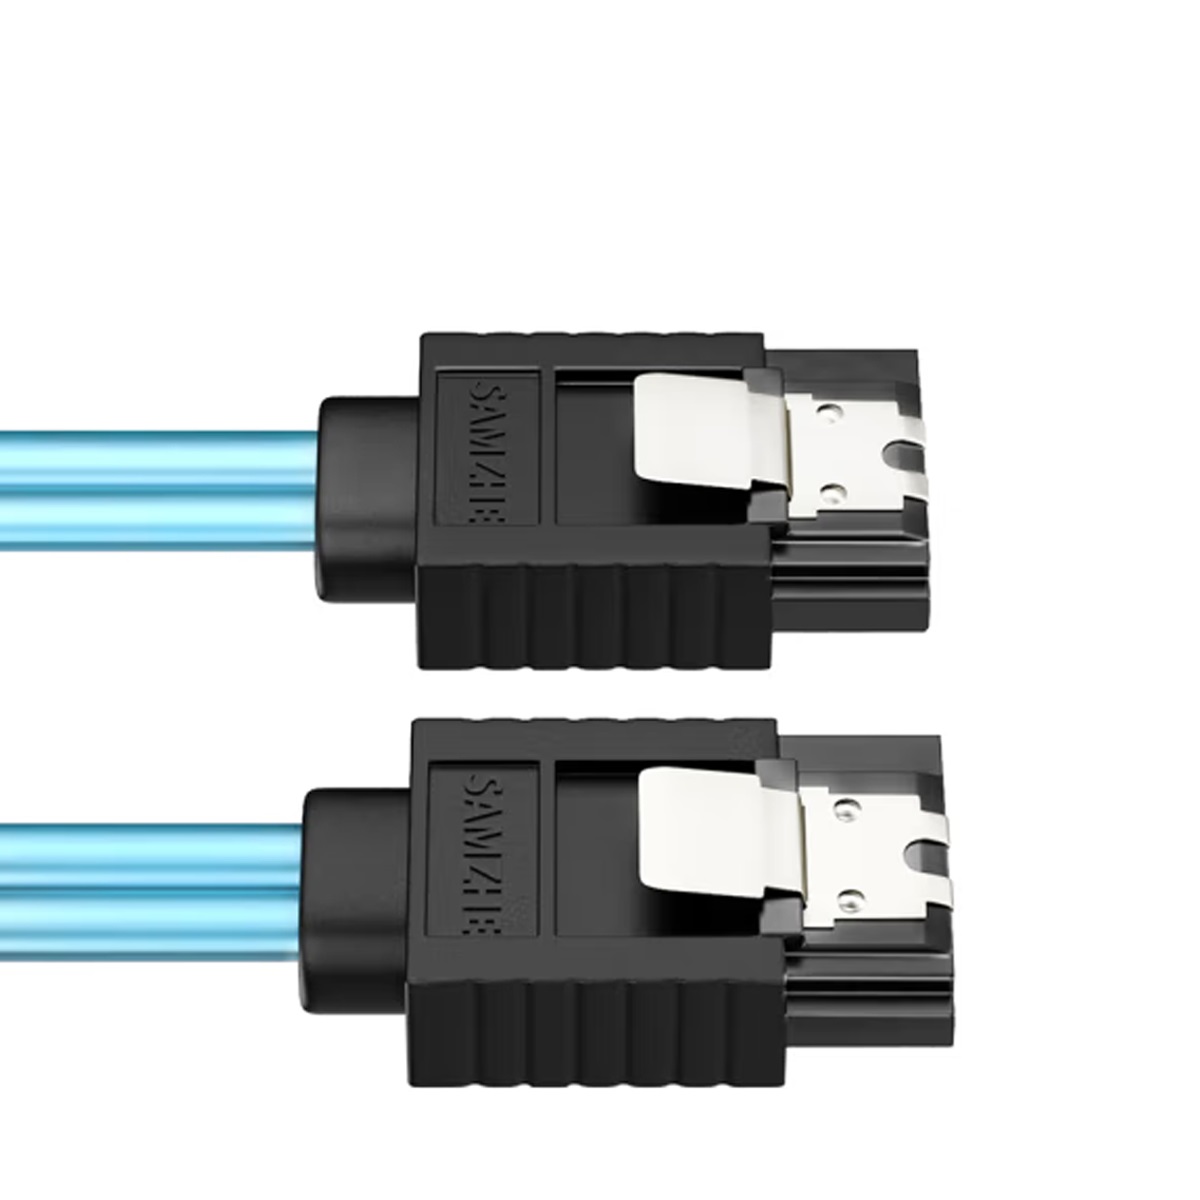 Dây cáp SATA 3 Cable 6Gbps 3.0 SATA Serial Data Cable dành cho ổ cứng HDD, SSD